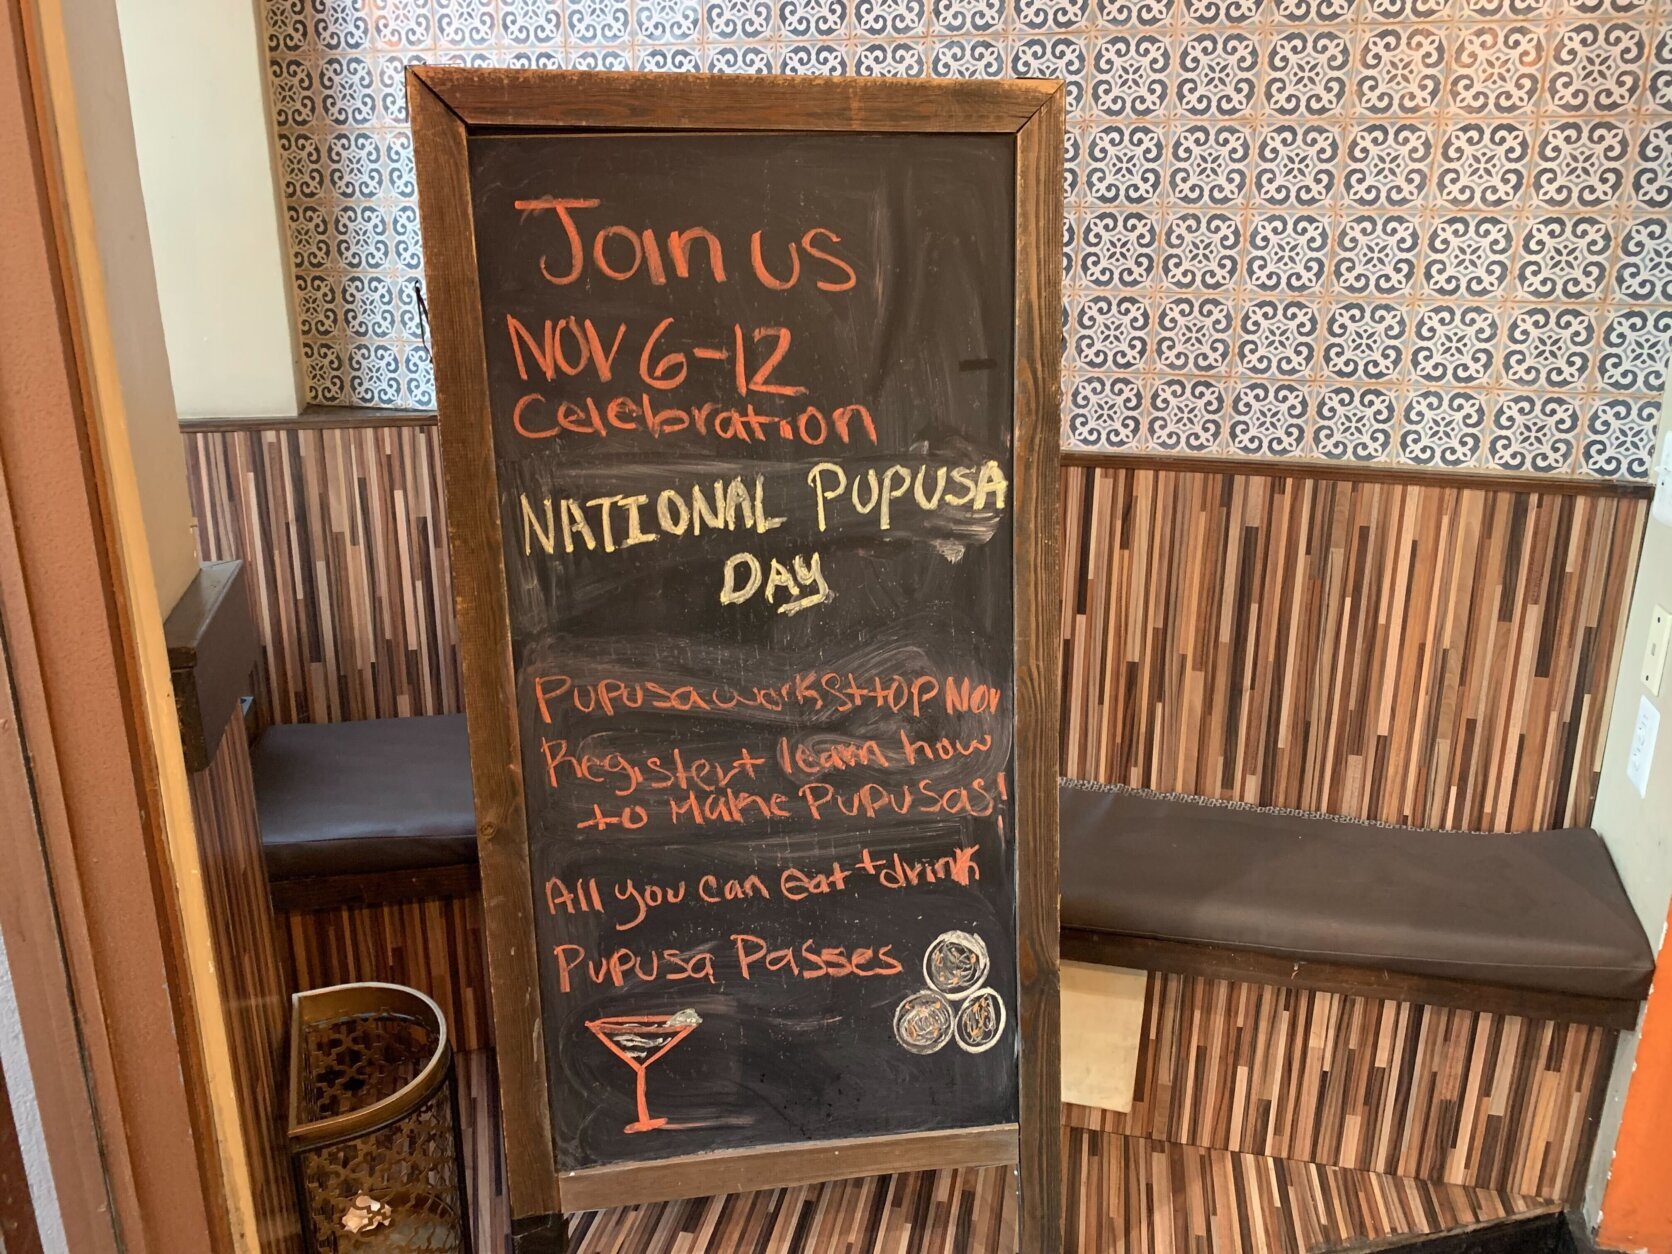 a sign shows a list of events for National Pupusa Day